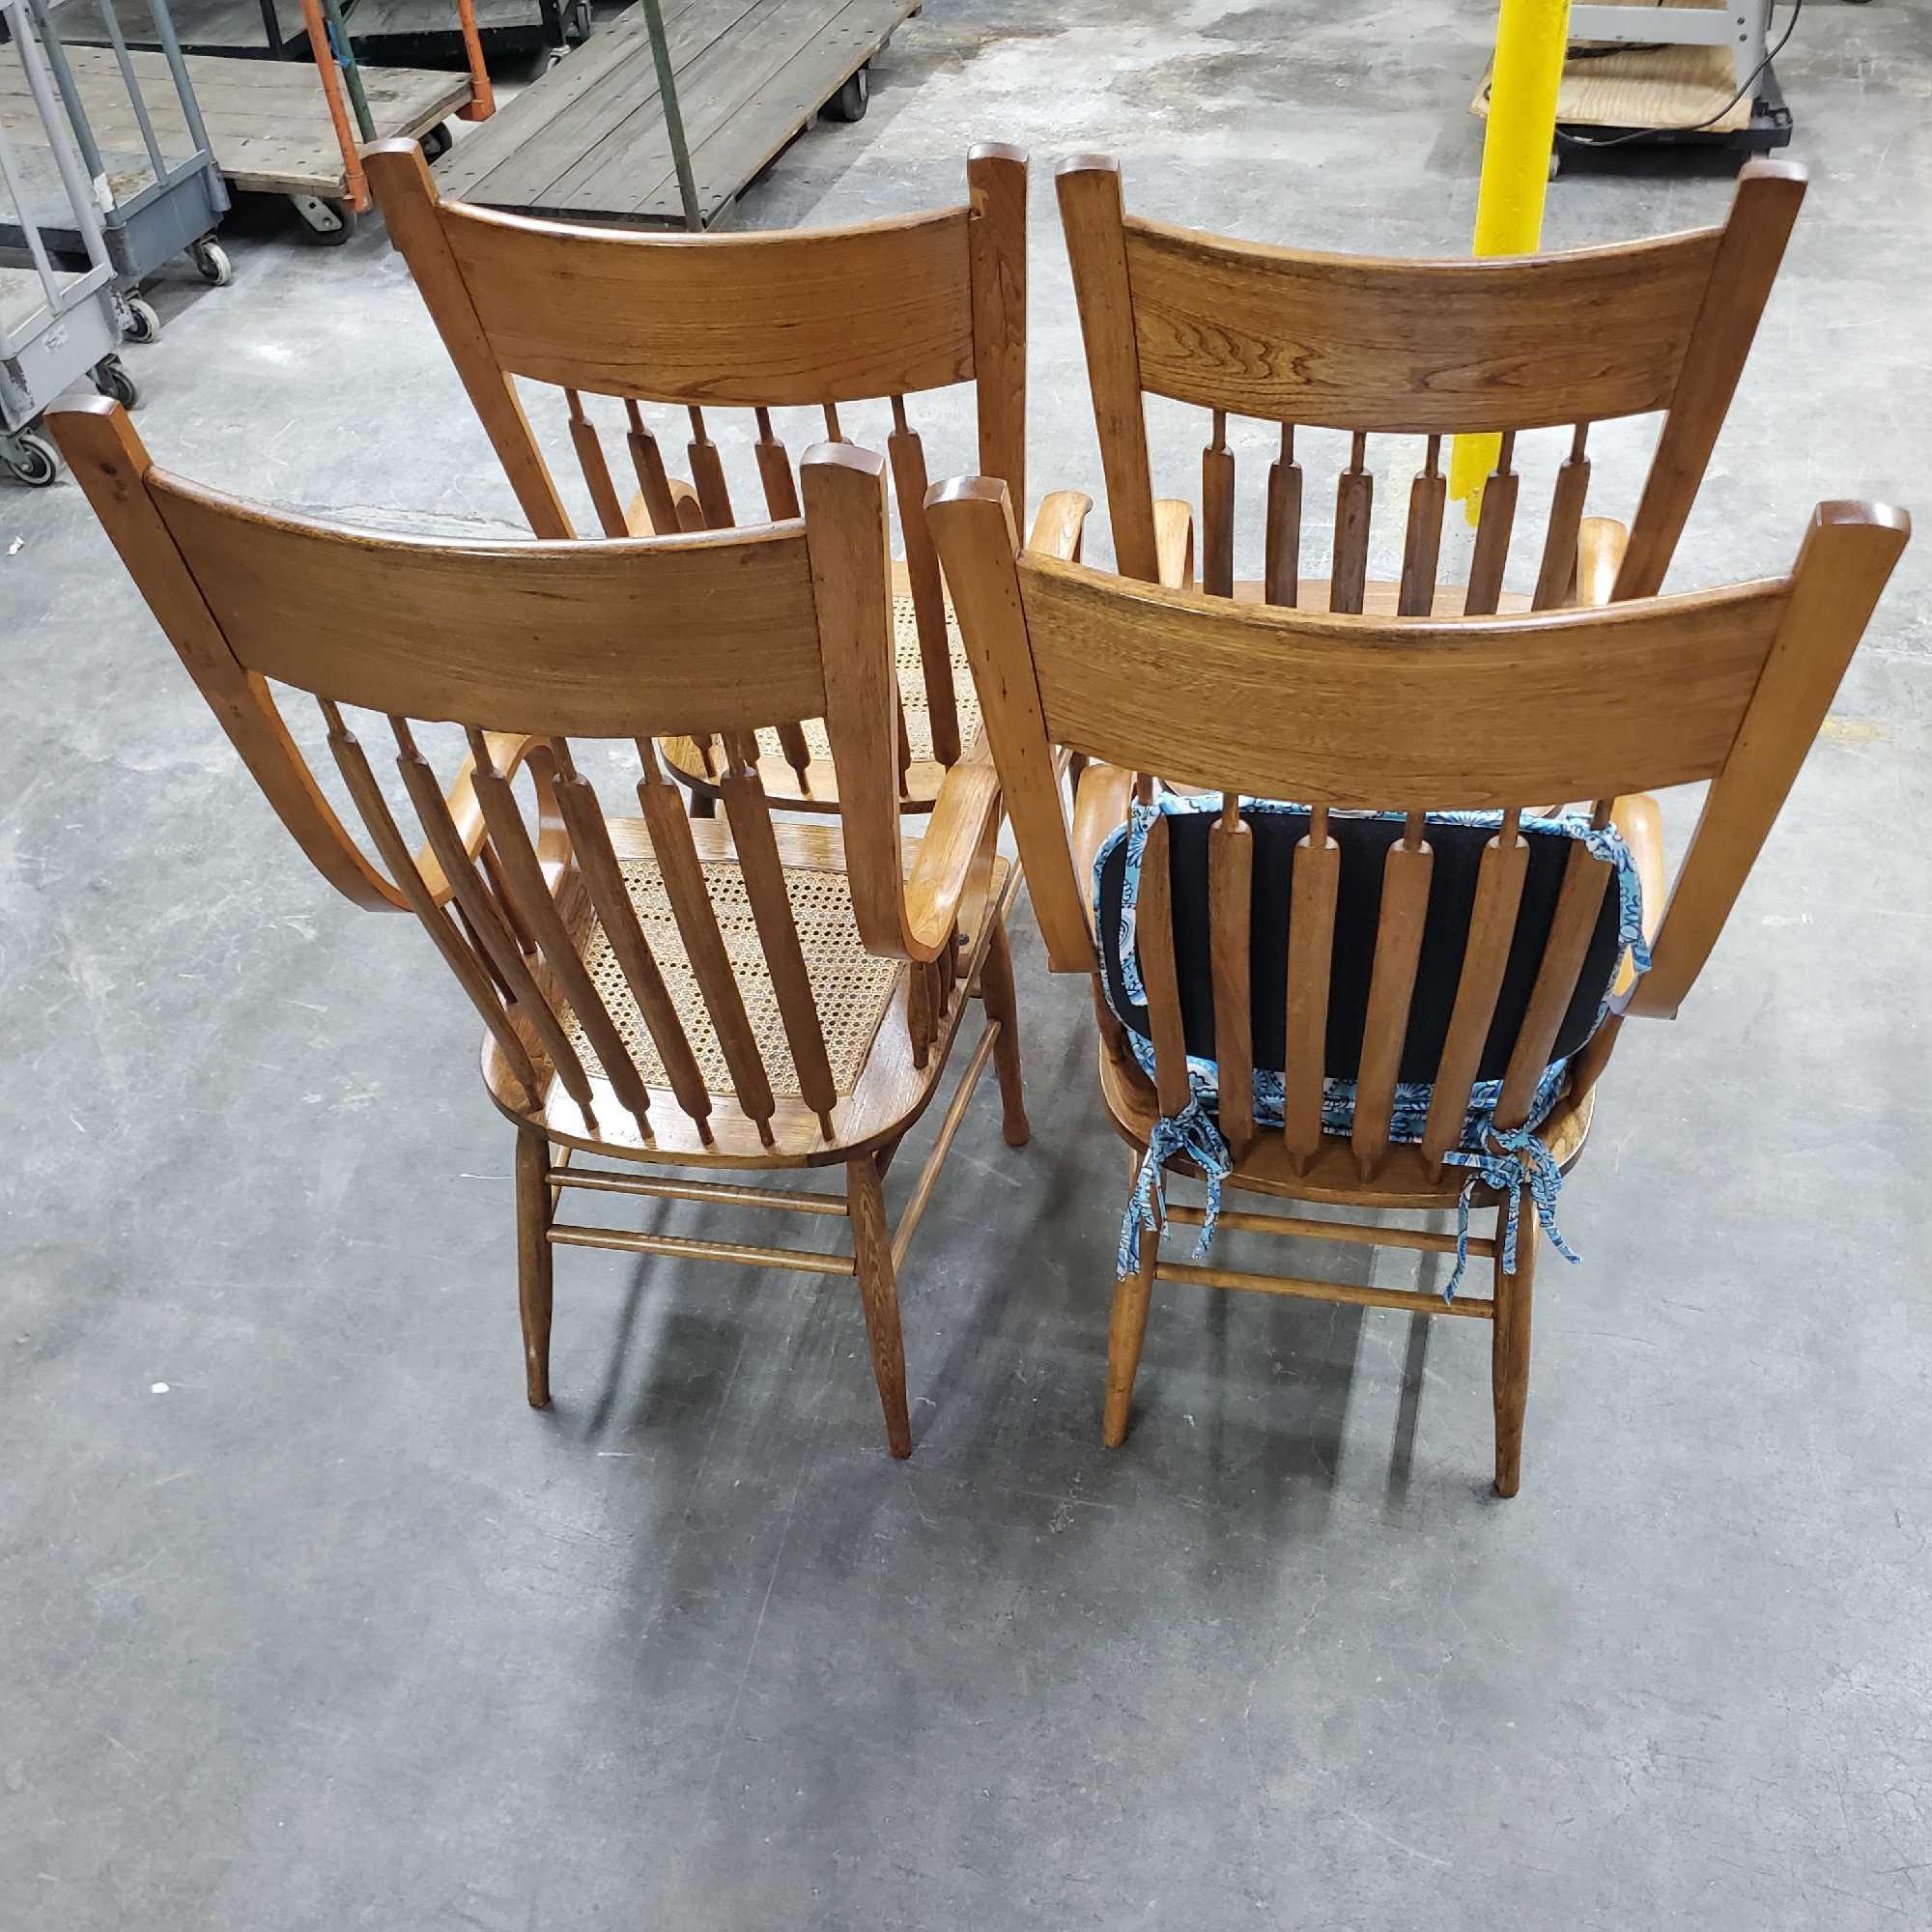 Lot 4 oakvcane seat dinning room chairs with ingraved floral design comes with 3 cushions